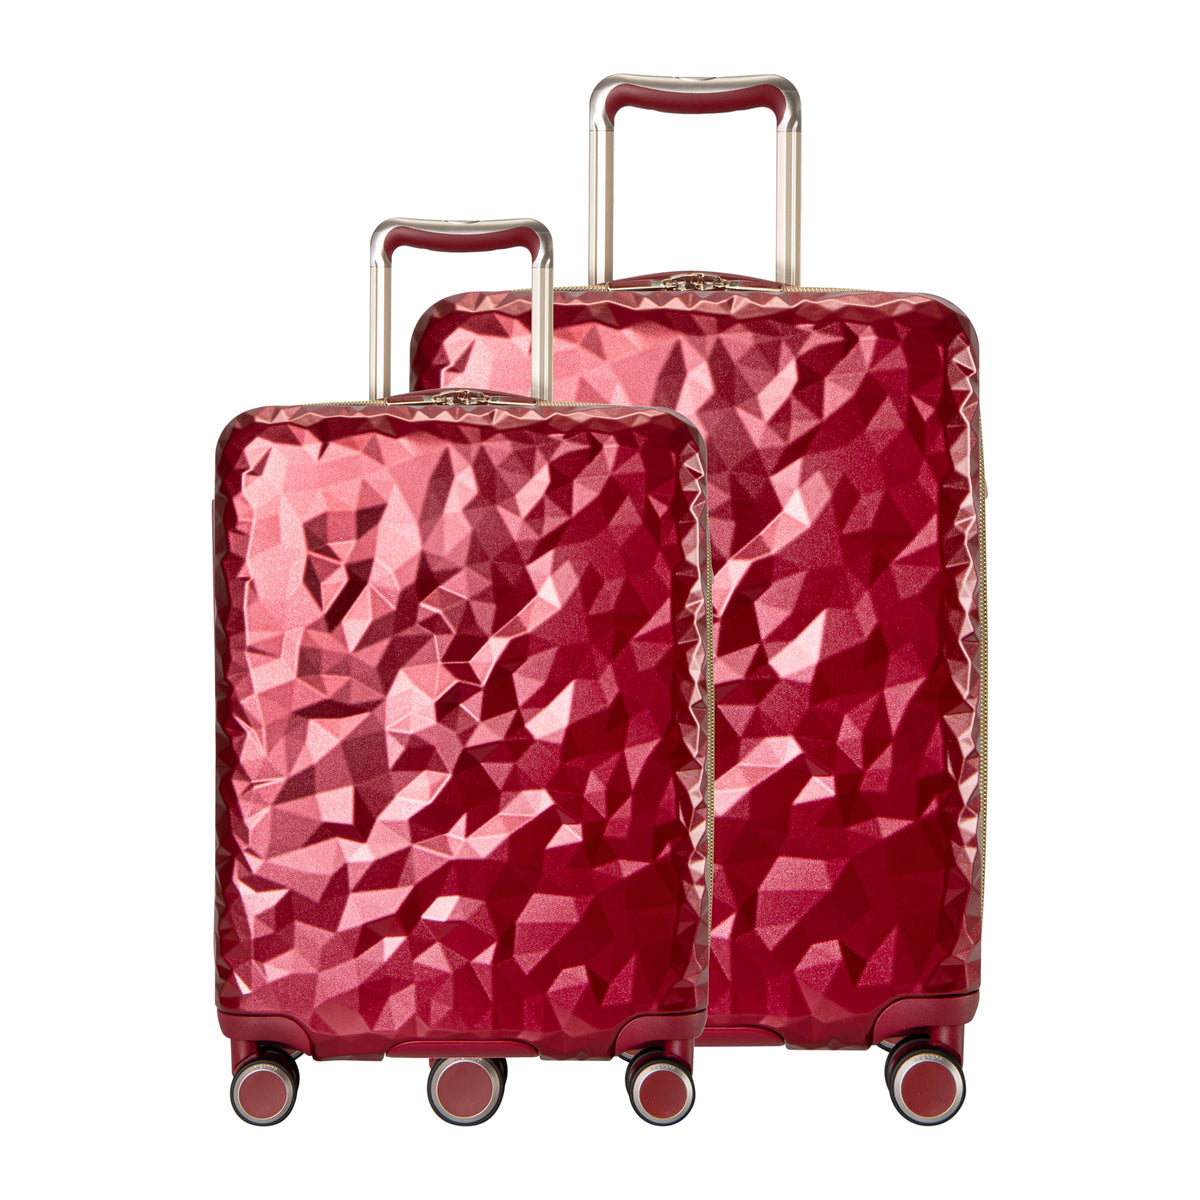 Ricardo Beverly Hills Indio Indio Hardside 2-Piece Set (20" Carry-On, 28" Large Checked) Ruby